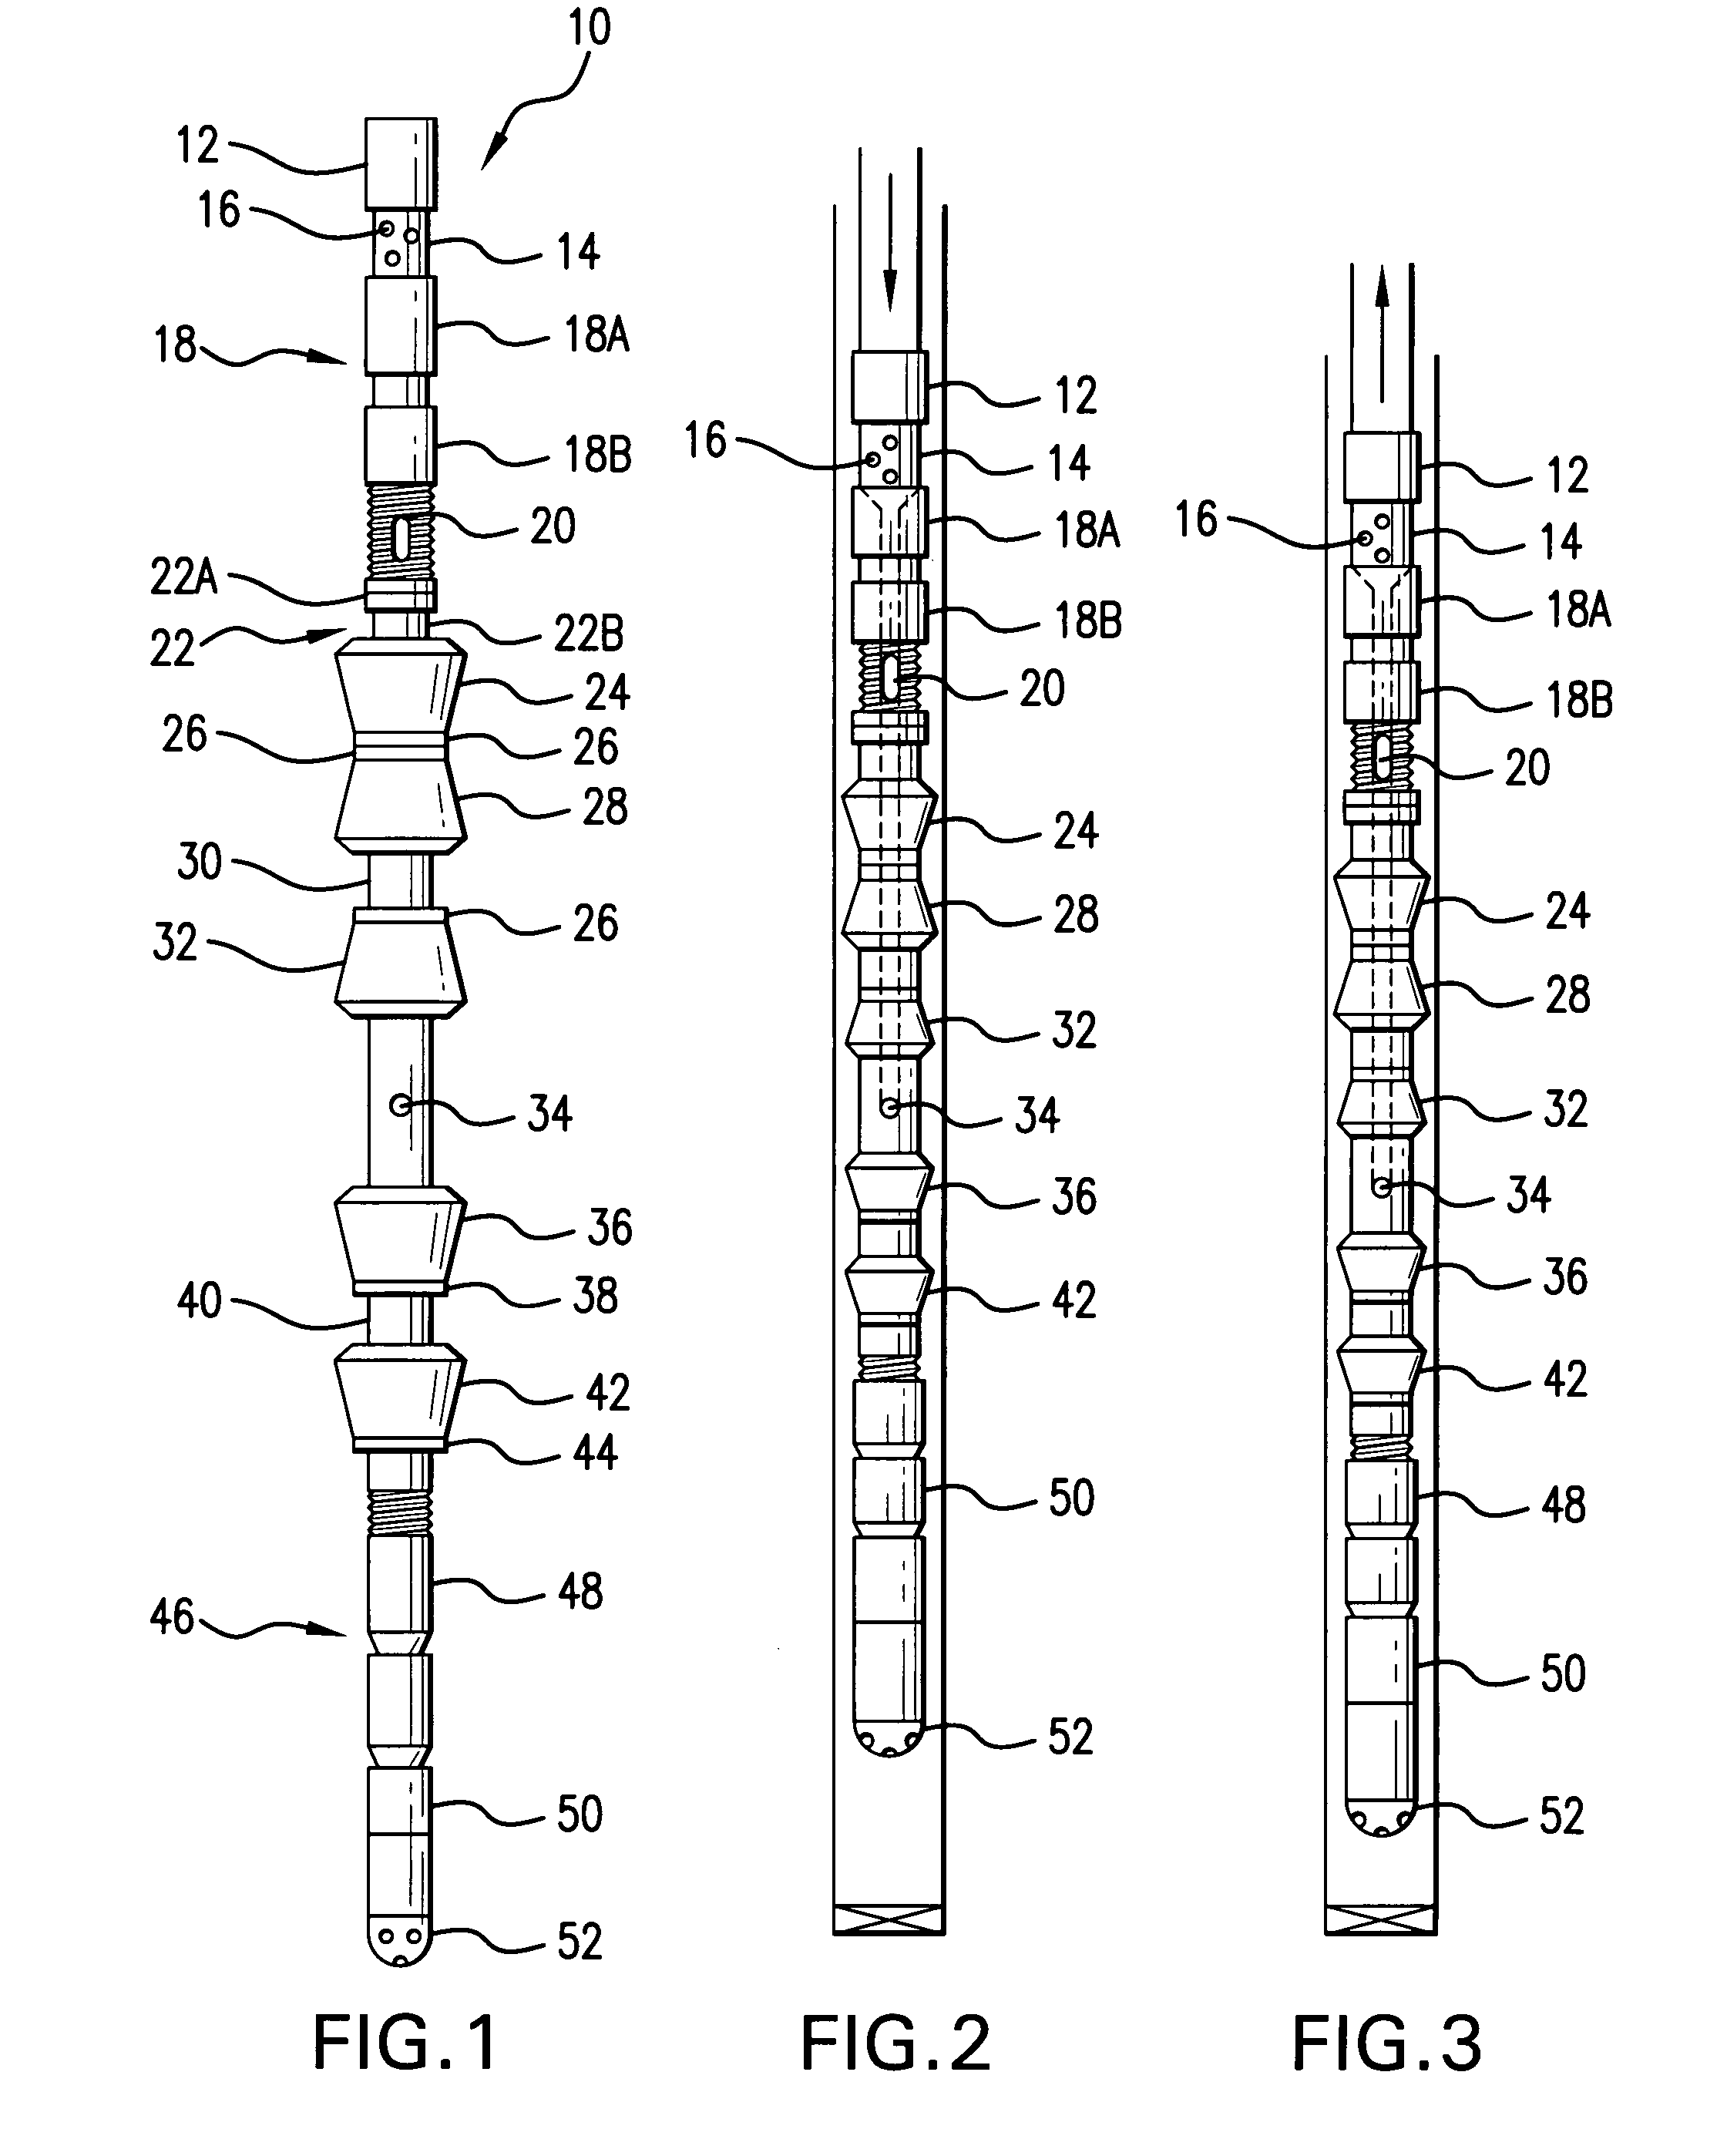 Method for simultaneous removal of asphaltene, and/or paraffin and scale from producing oil wells